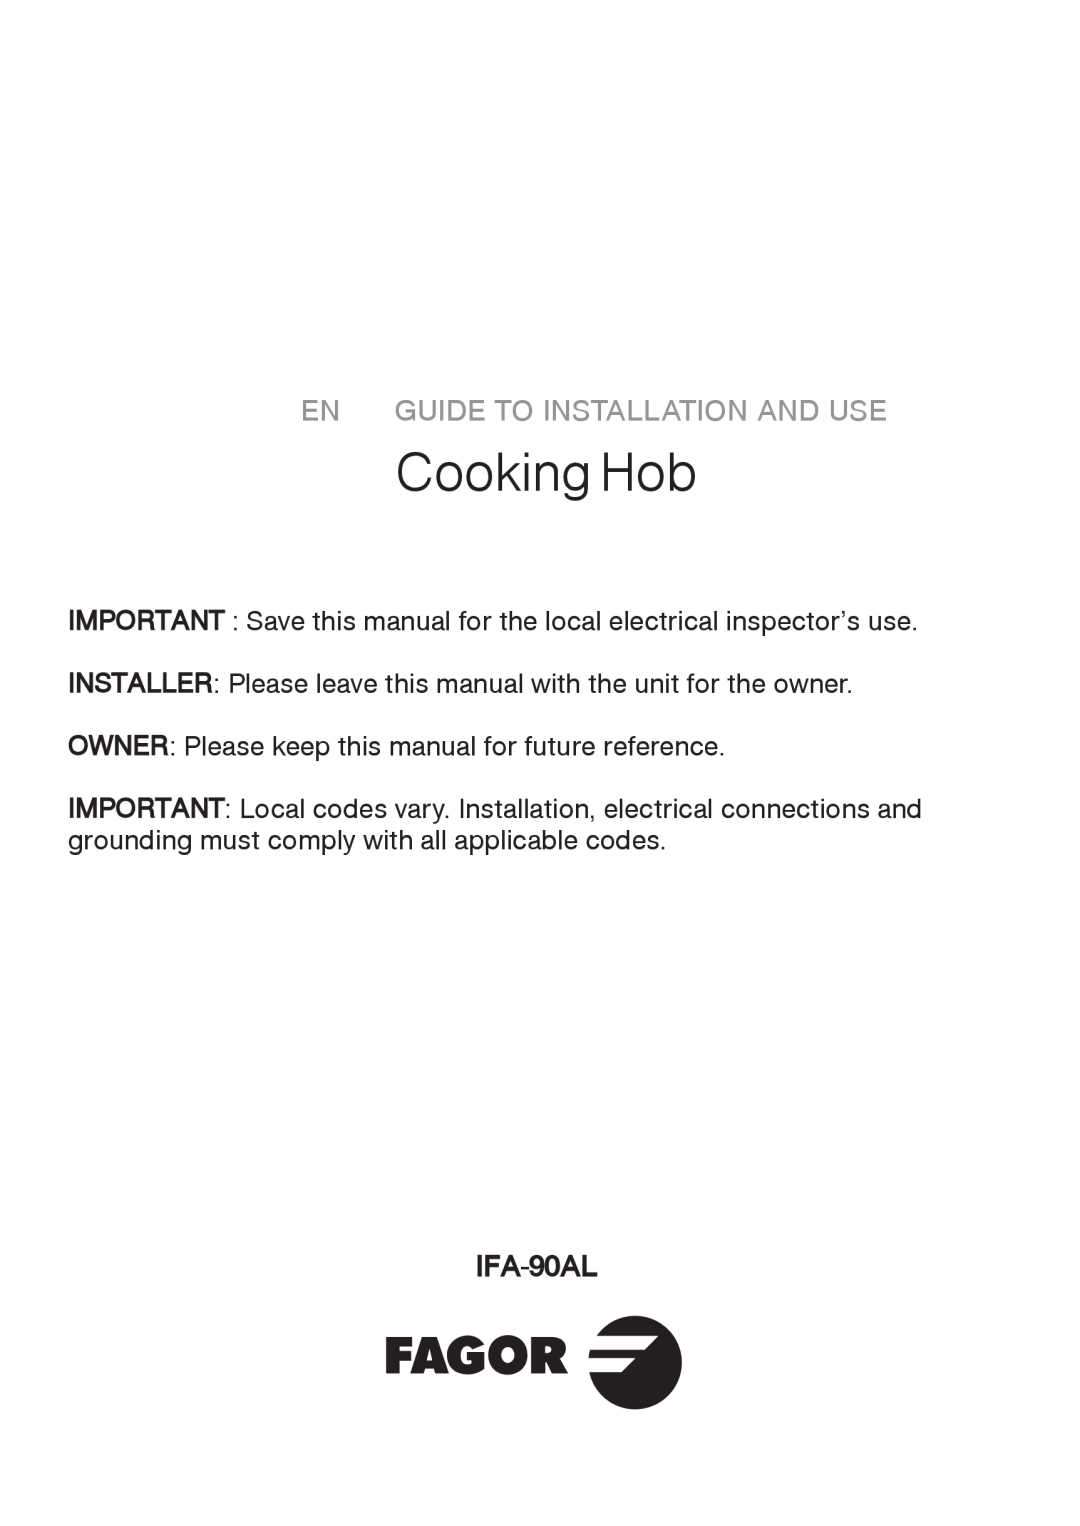 Fagor America manual Cooking Hob, En Guide To Installation And Use, IFA-90AL 